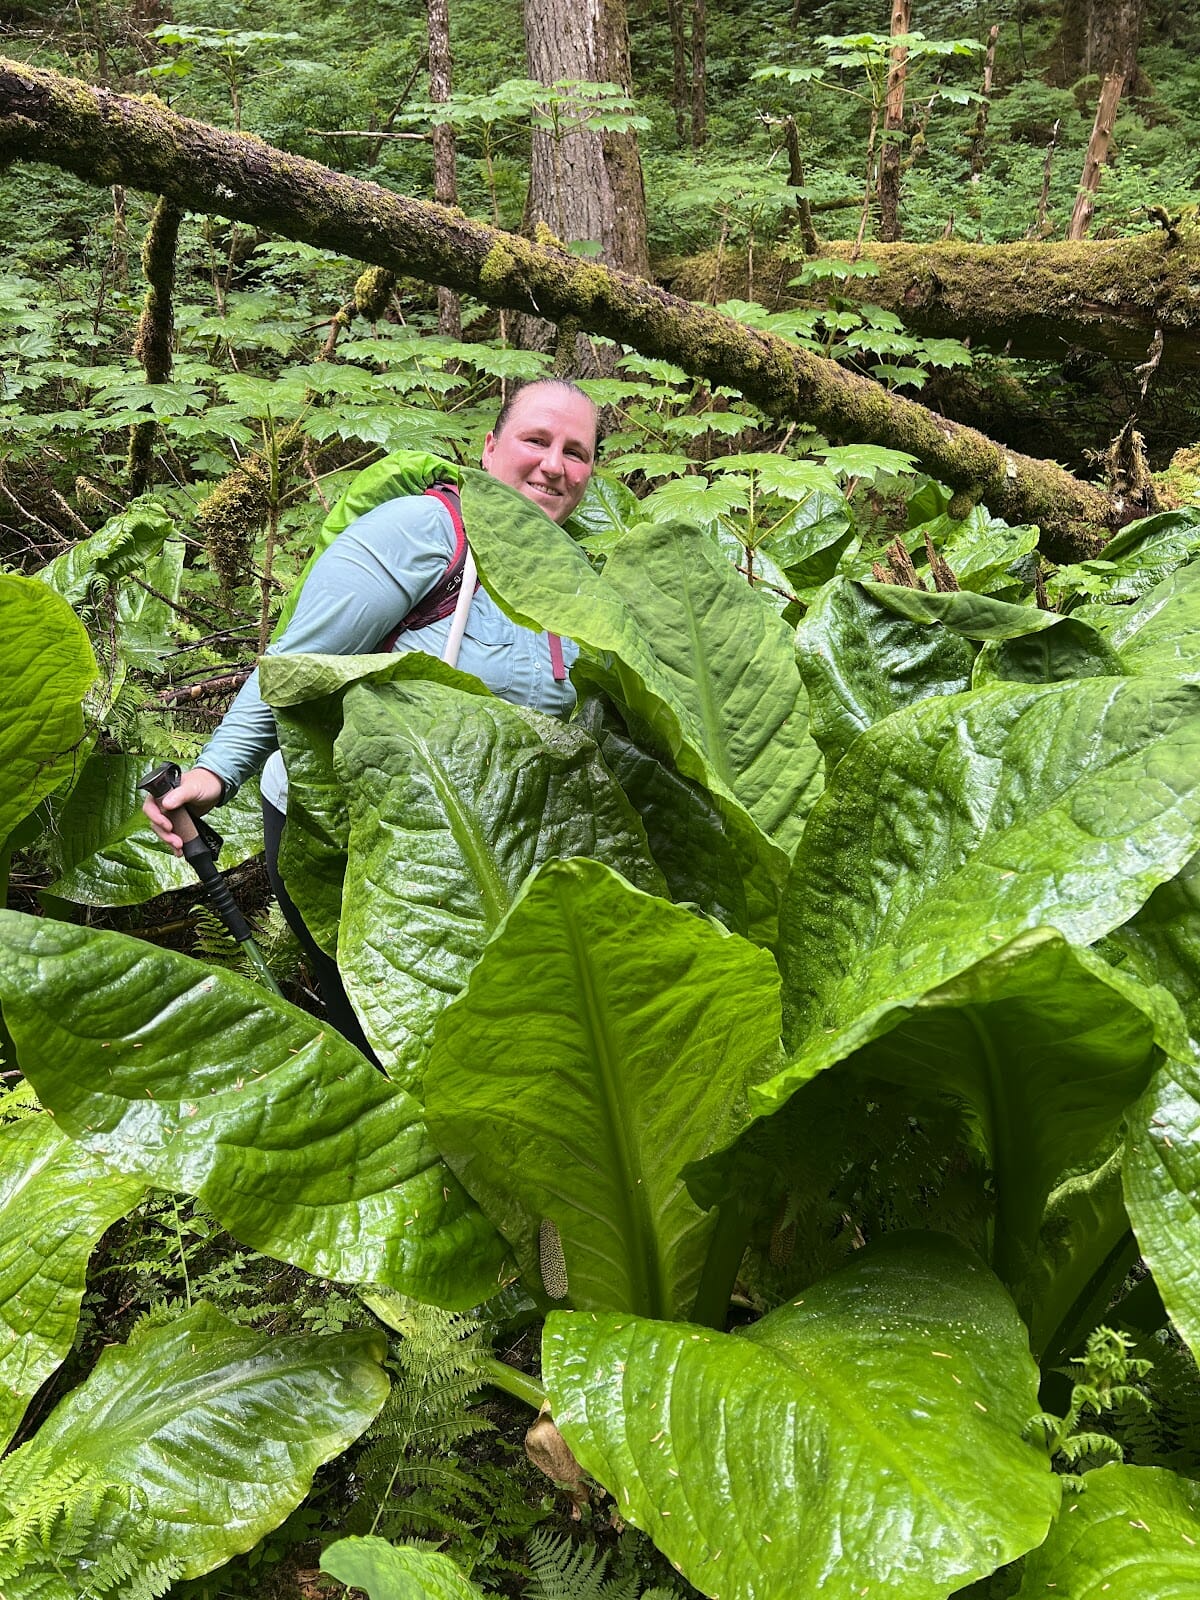 Walk Southeast 2022 participant in the middle of the Skunk Cabbage.